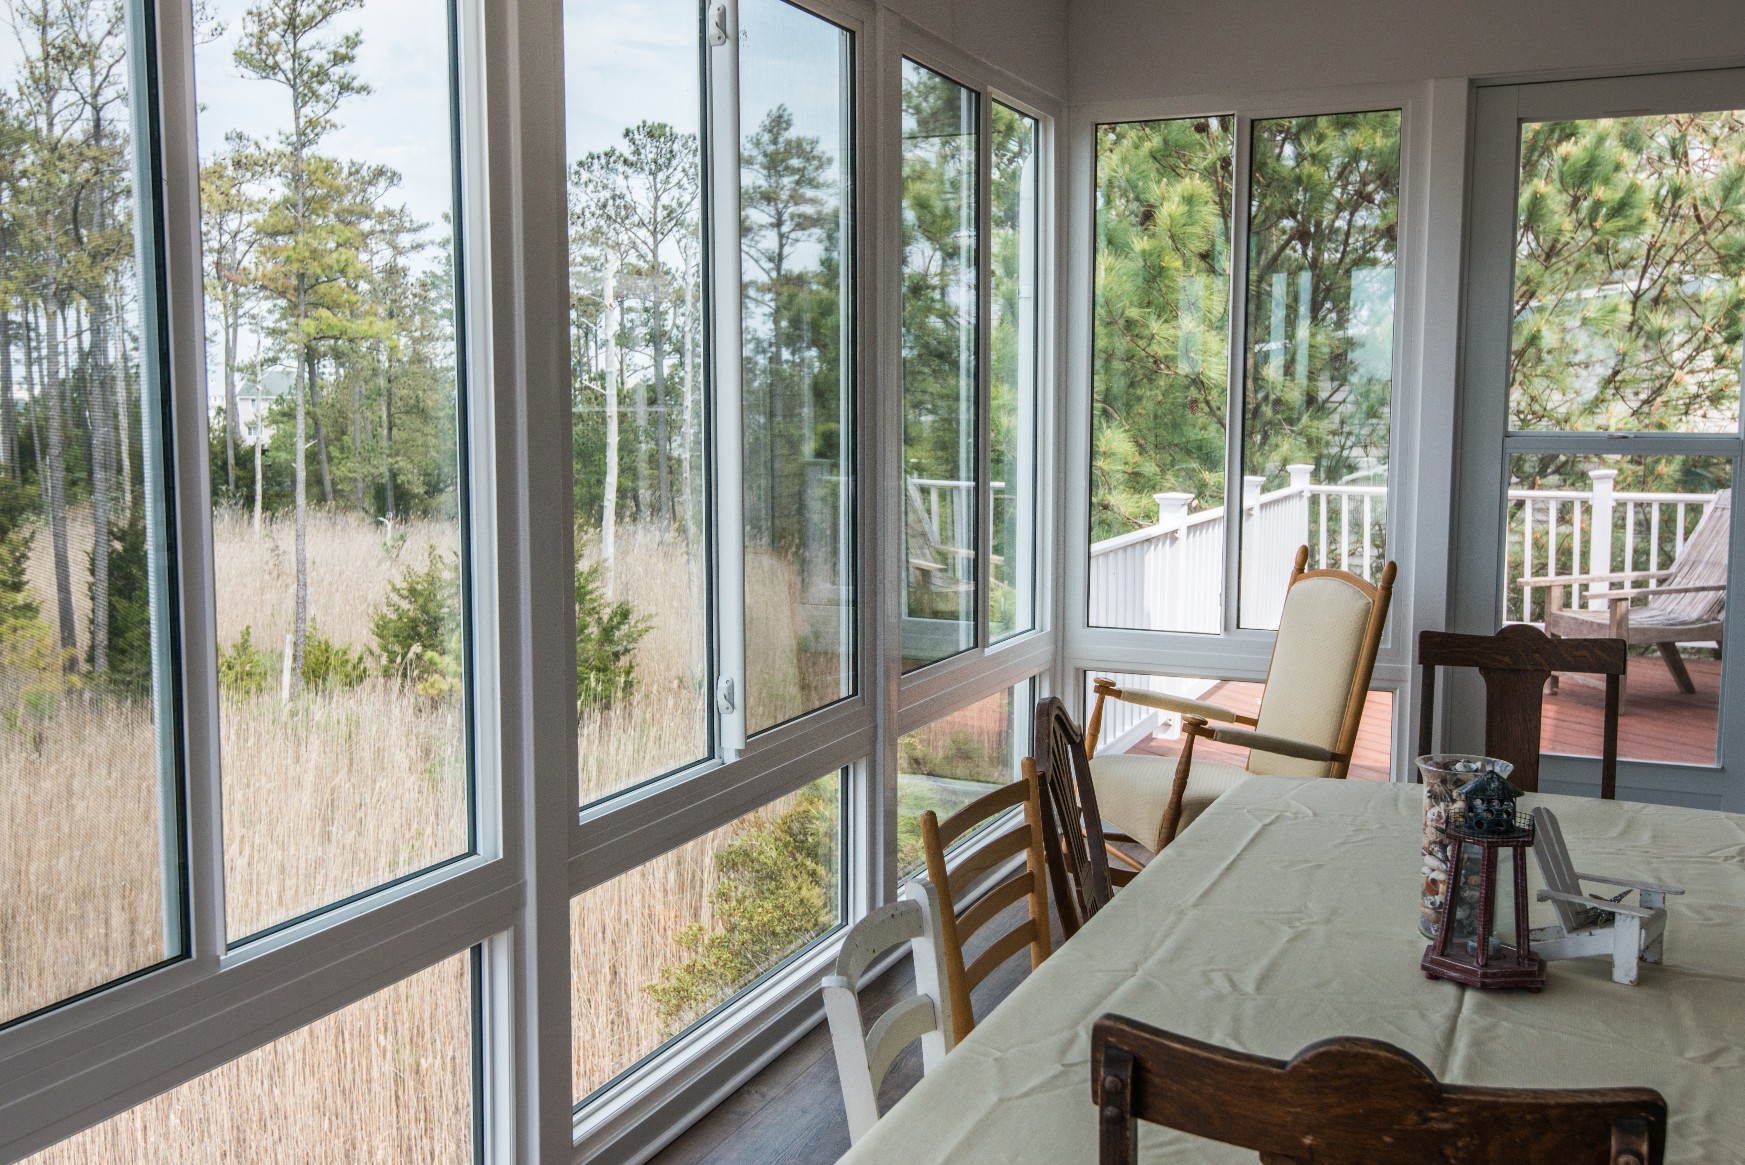 Whitesview Court Sunroom Vol.2 in Ocean View DE with Screen System and Right Side Deck